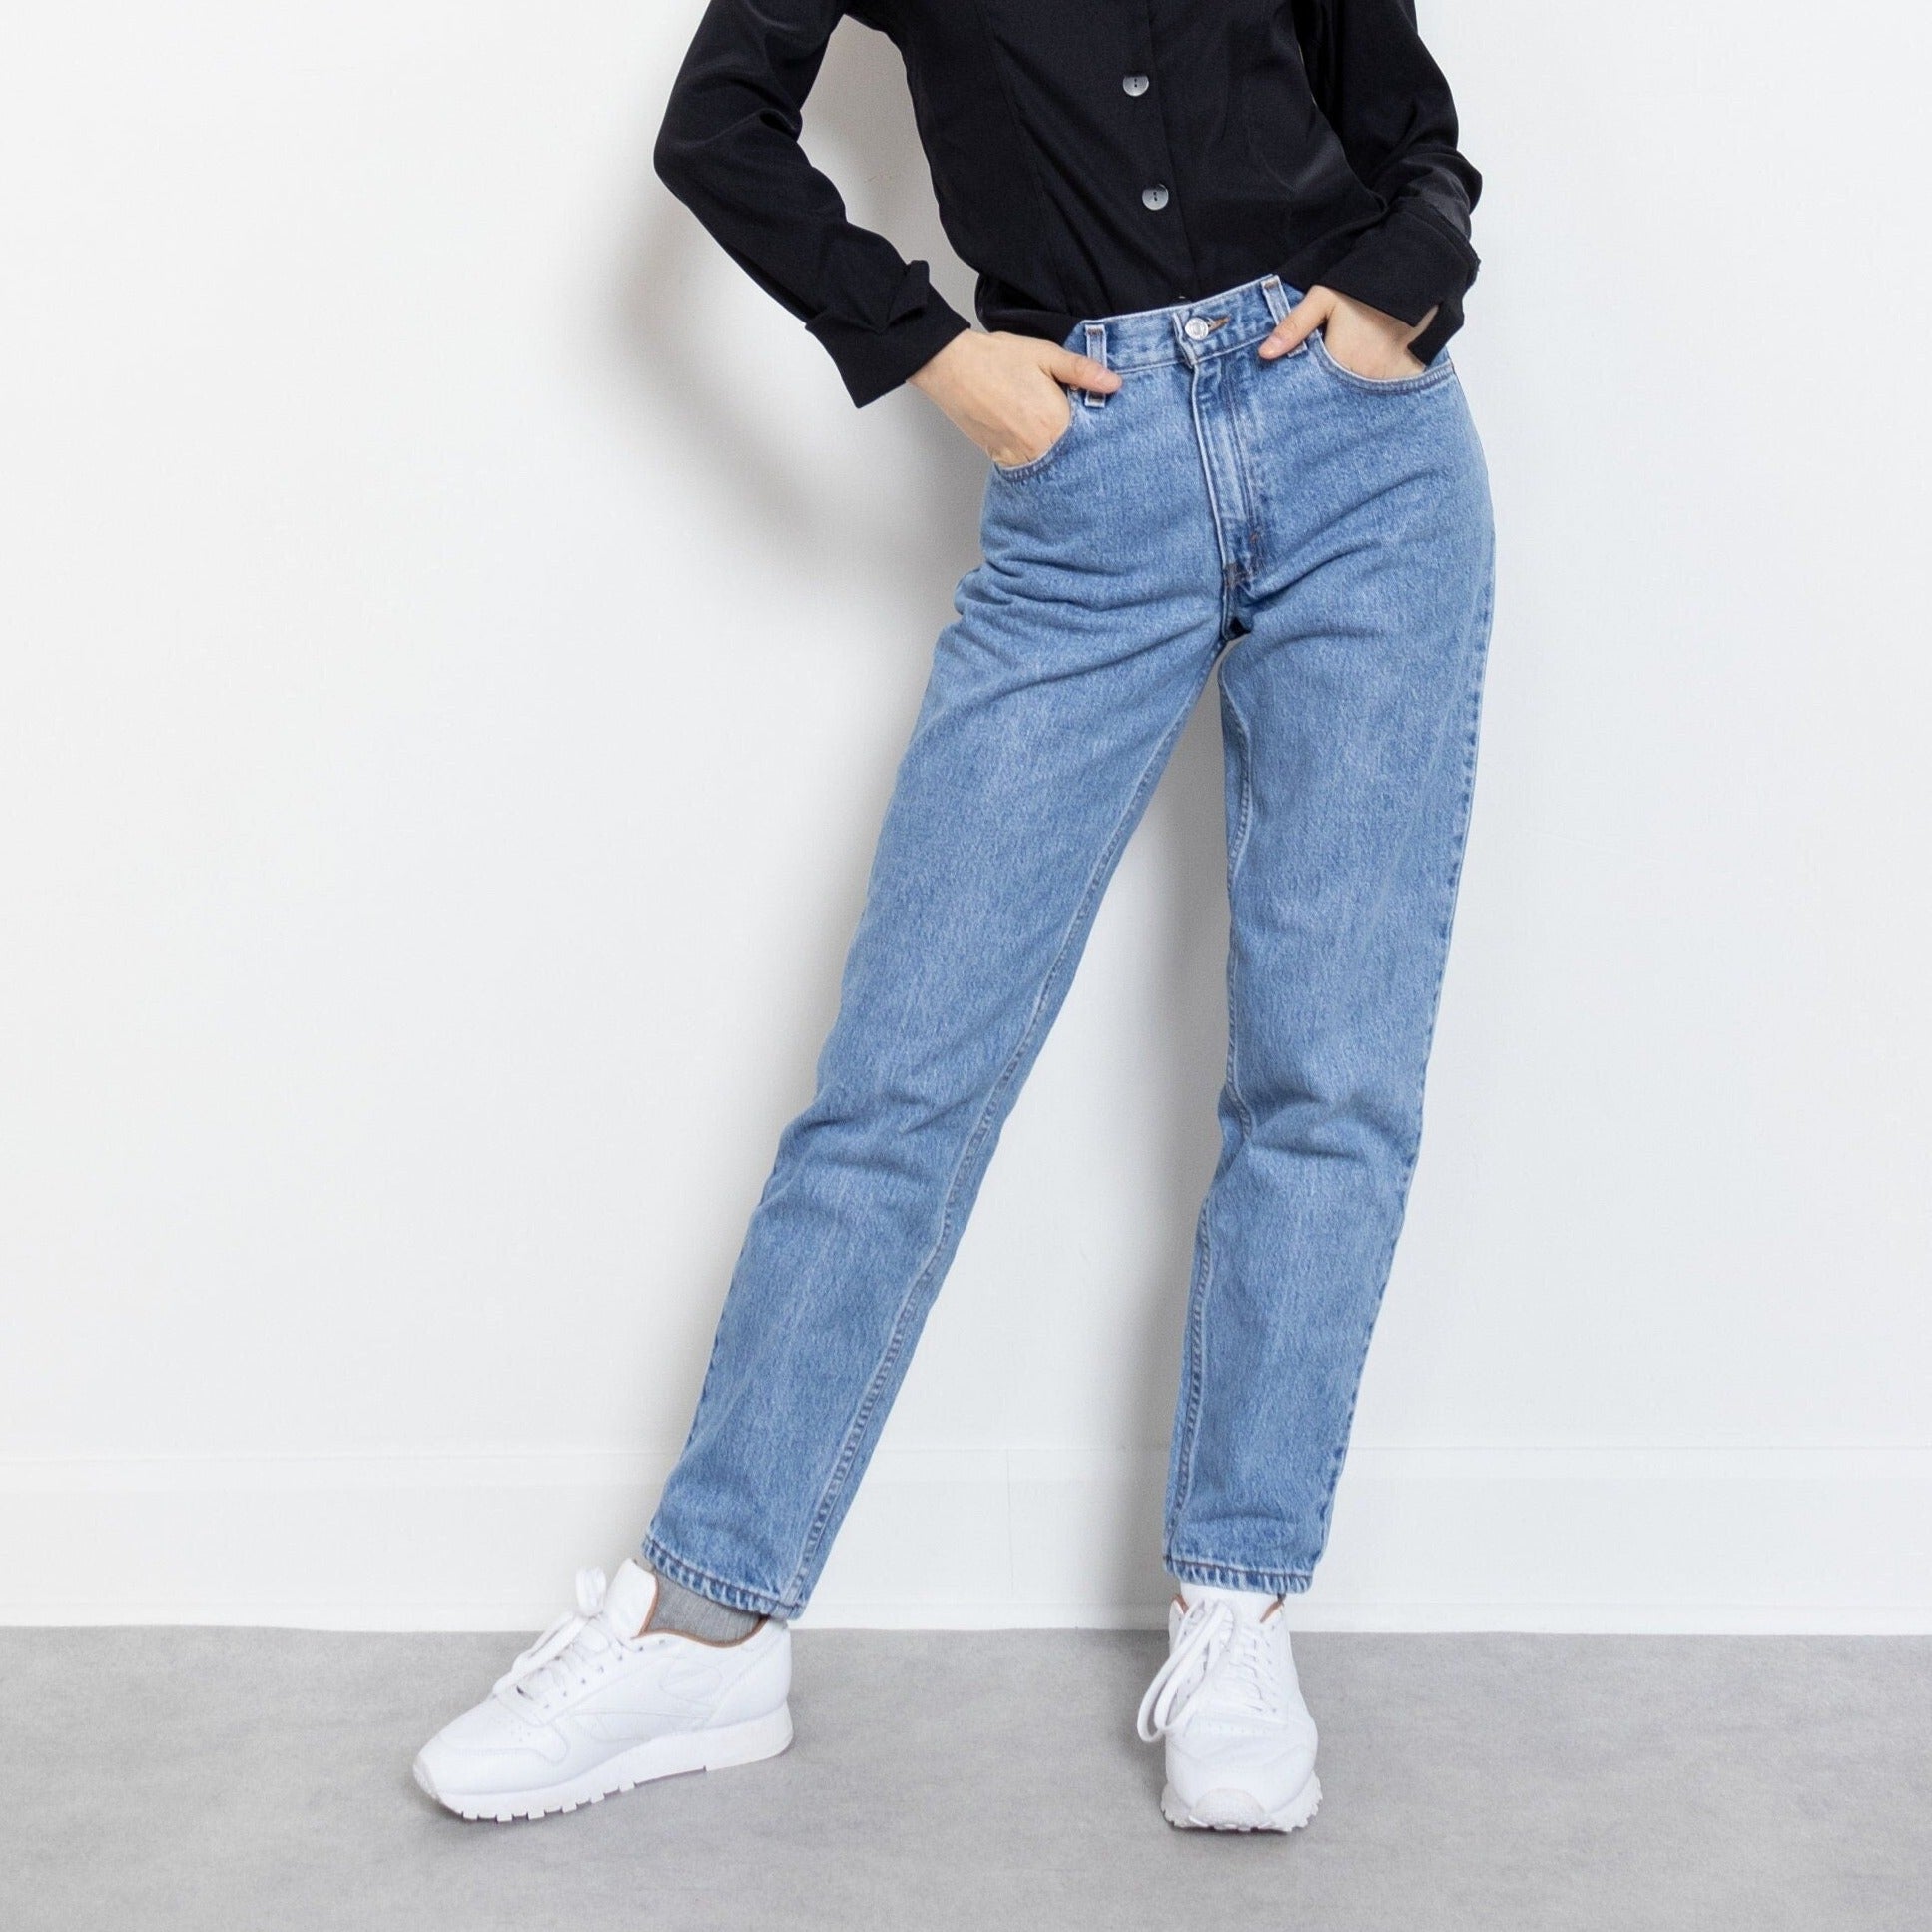 Levi's 550 Vintage Women's Jeans – Better Stay Together